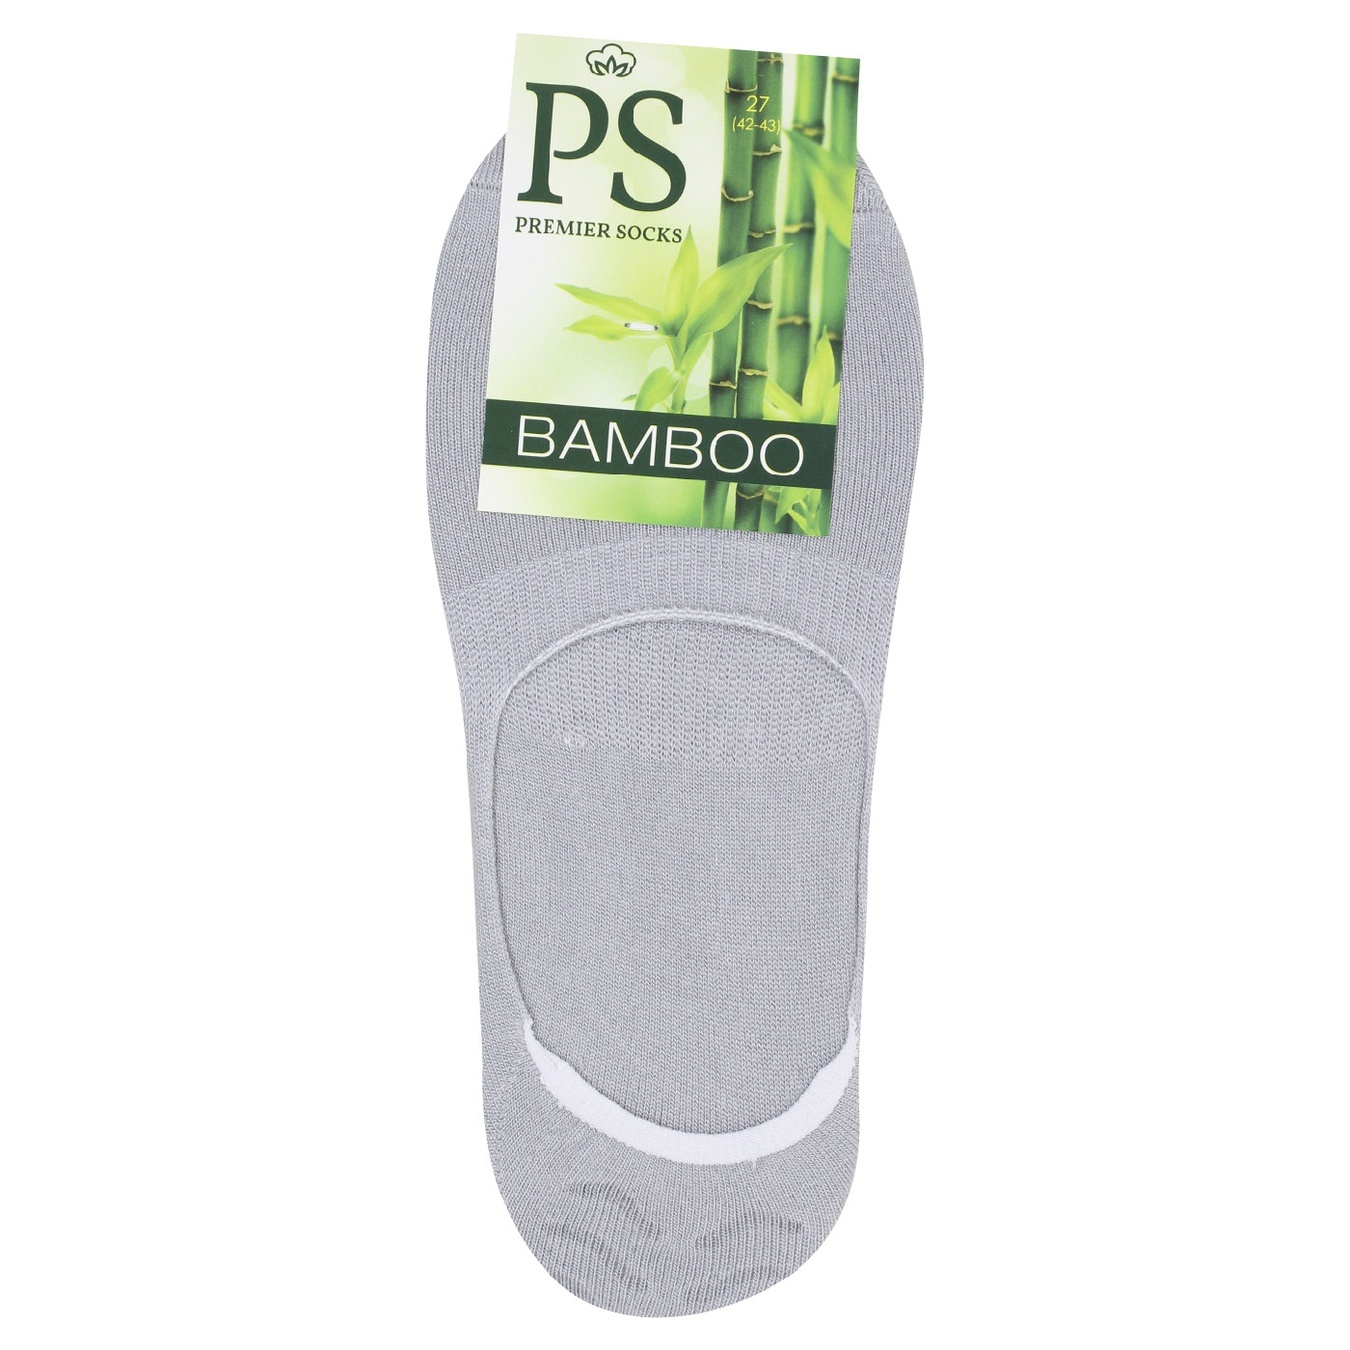 Men's socks Premier Socks Bamboo gray open with silicone 27 years.